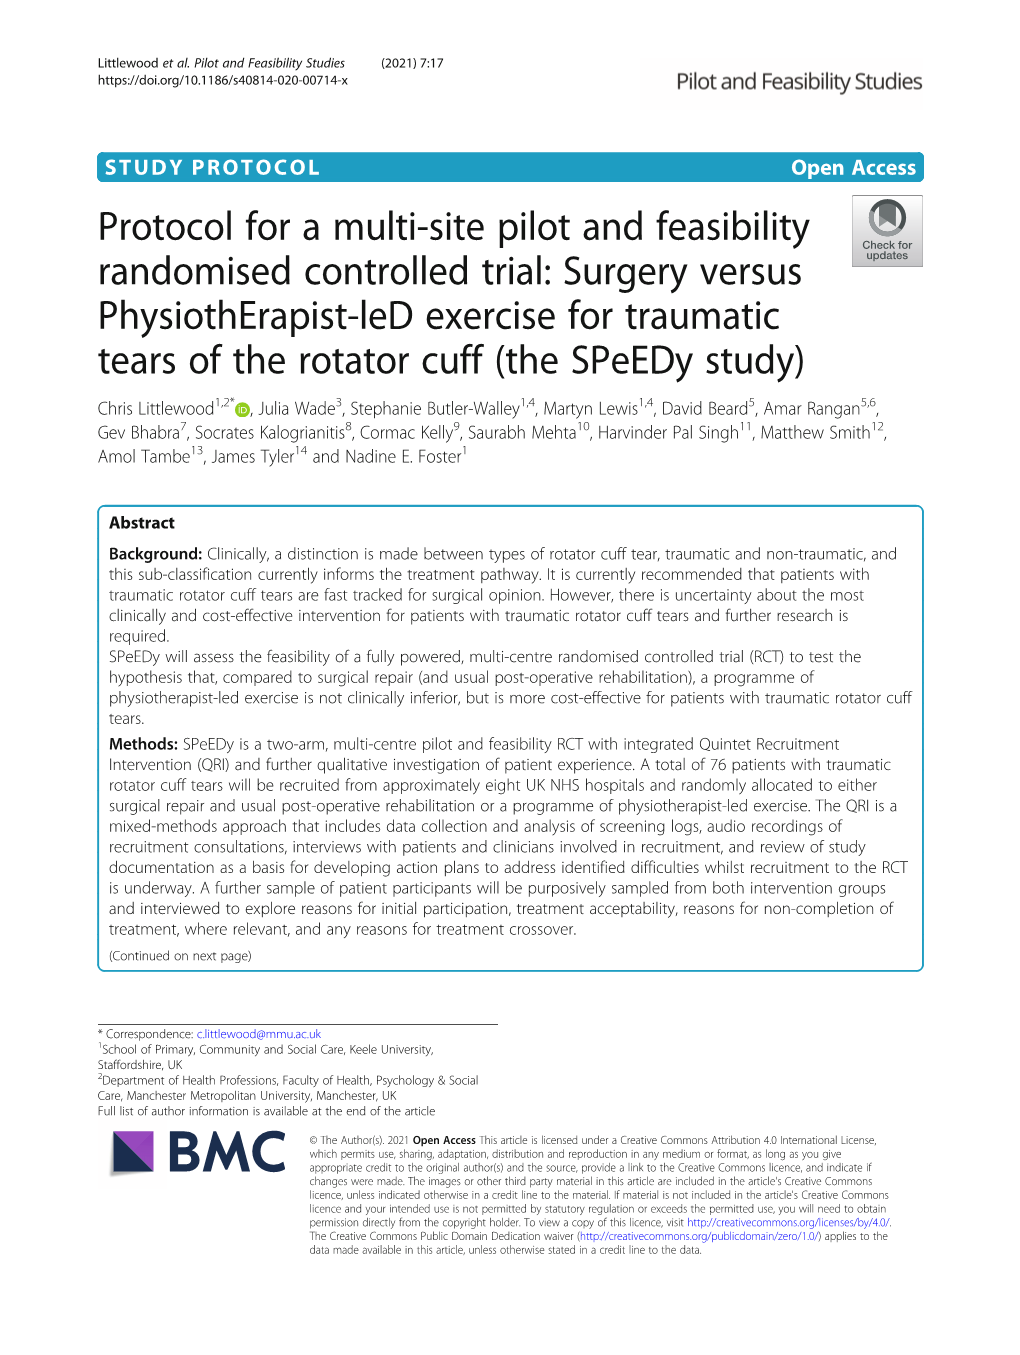 Protocol for a Multi-Site Pilot and Feasibility Randomised Controlled Trial